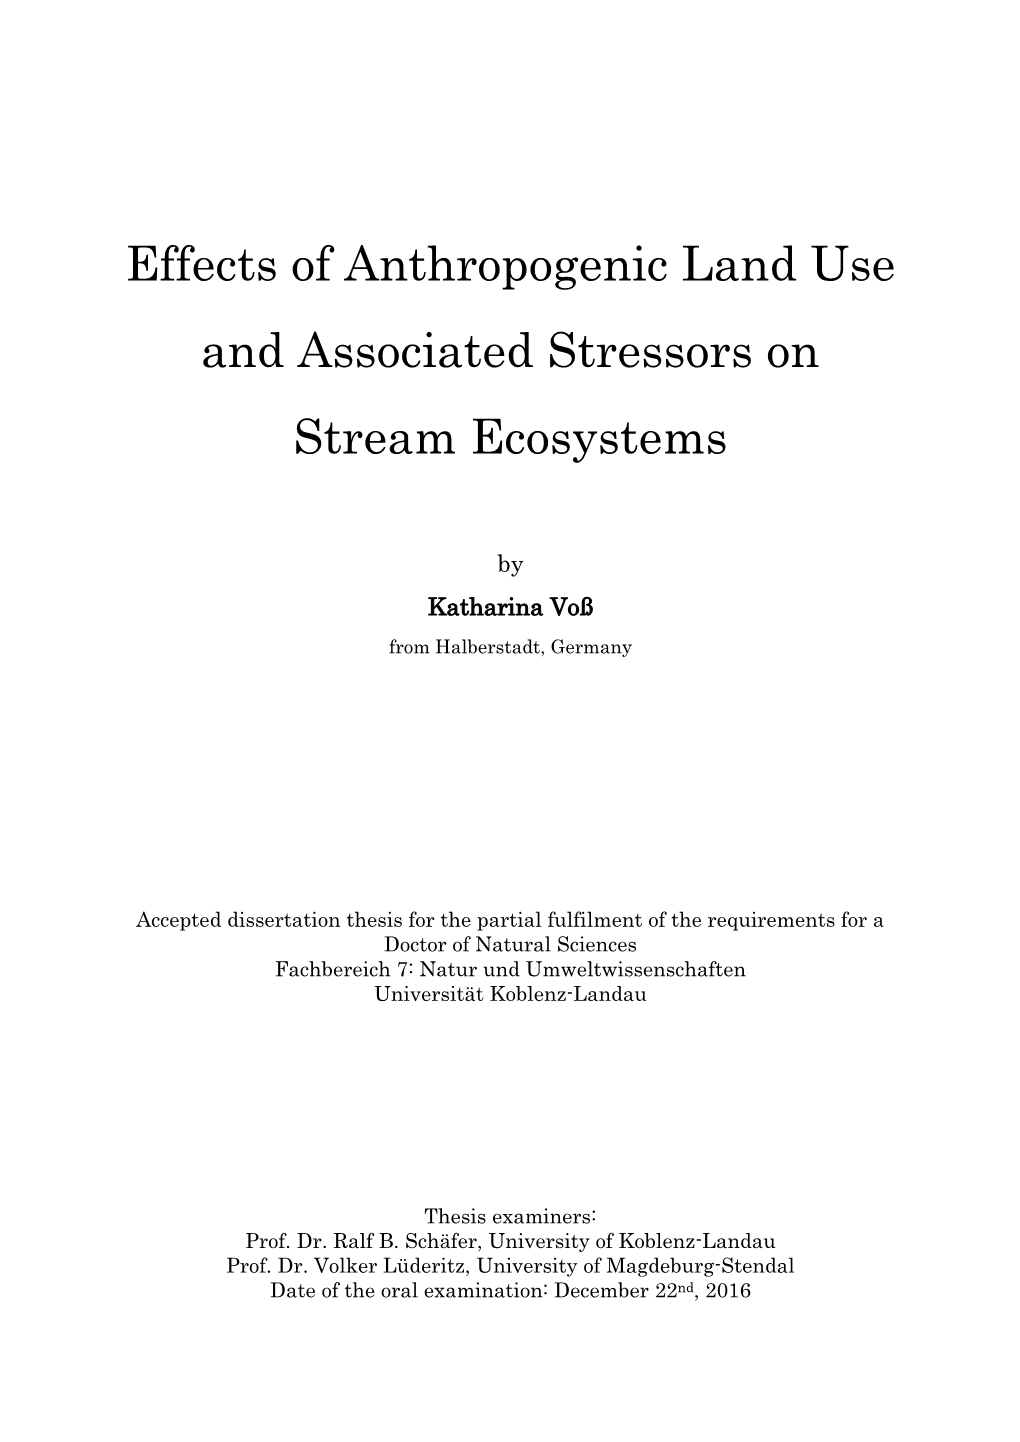 Effects of Anthropogenic Land Use and Associated Stressors On